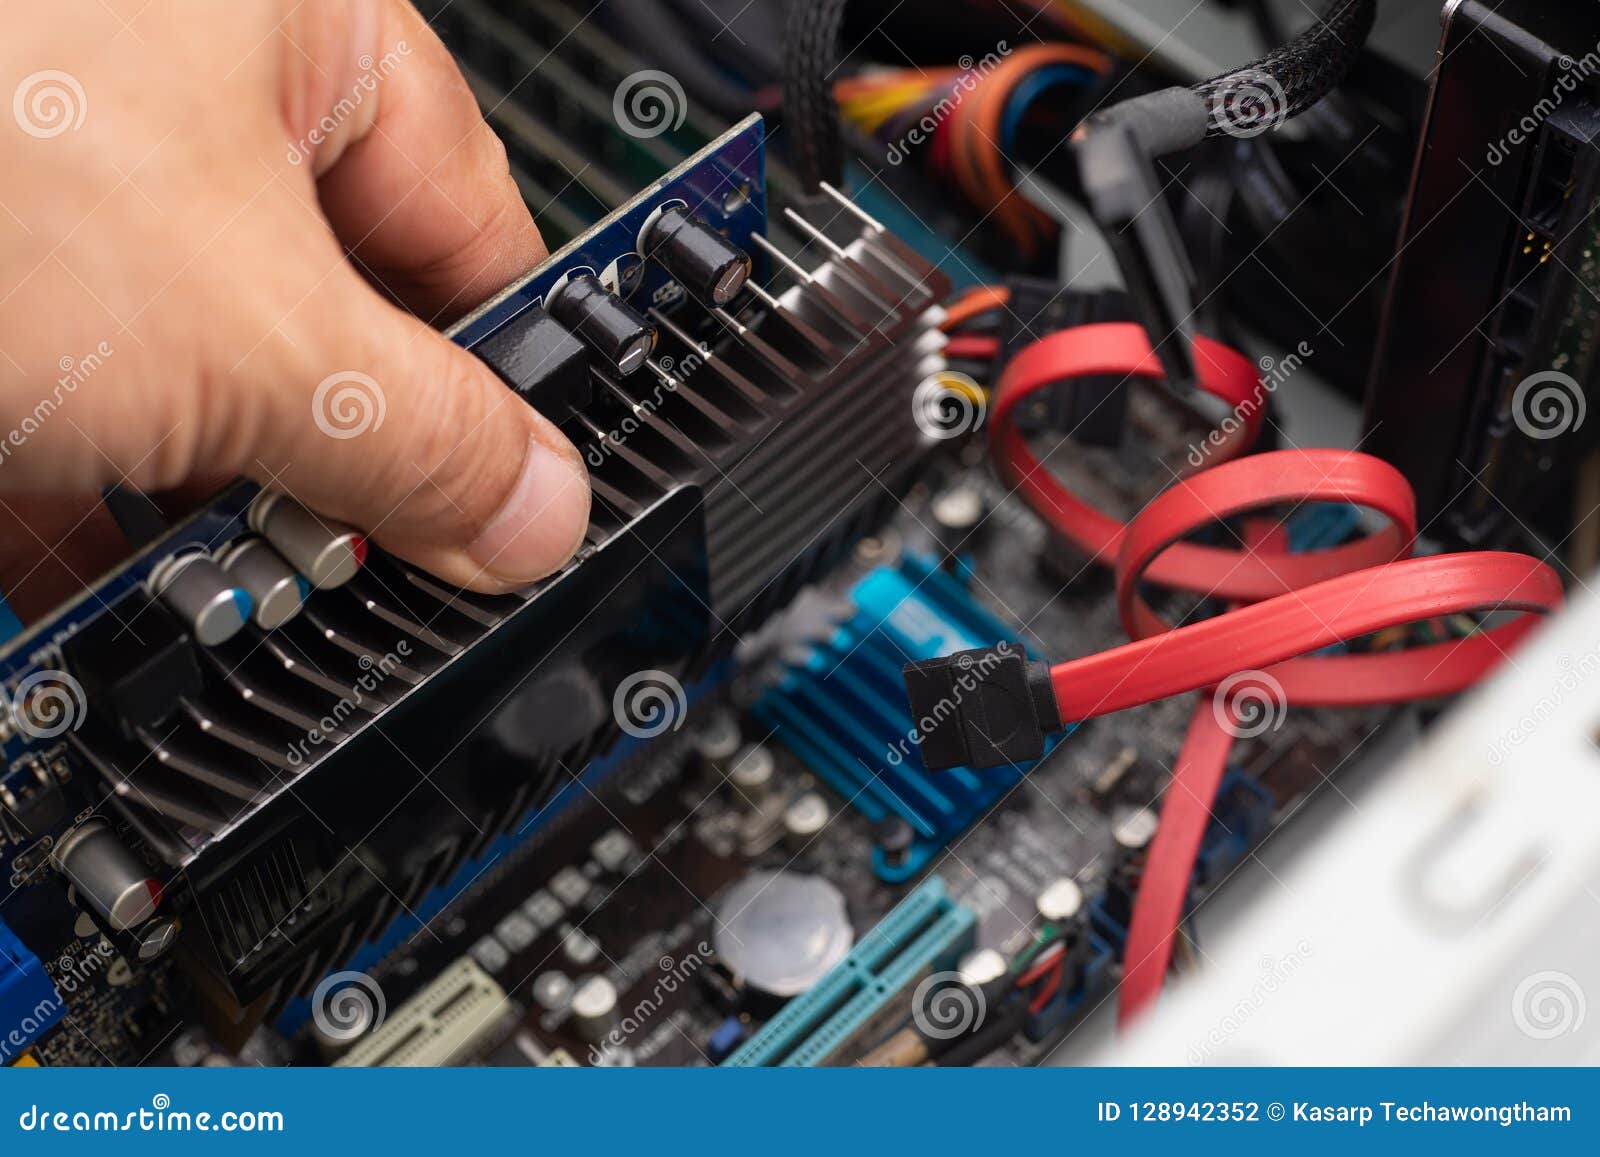 hand of technician installing a new graphics card gpu in pc ,